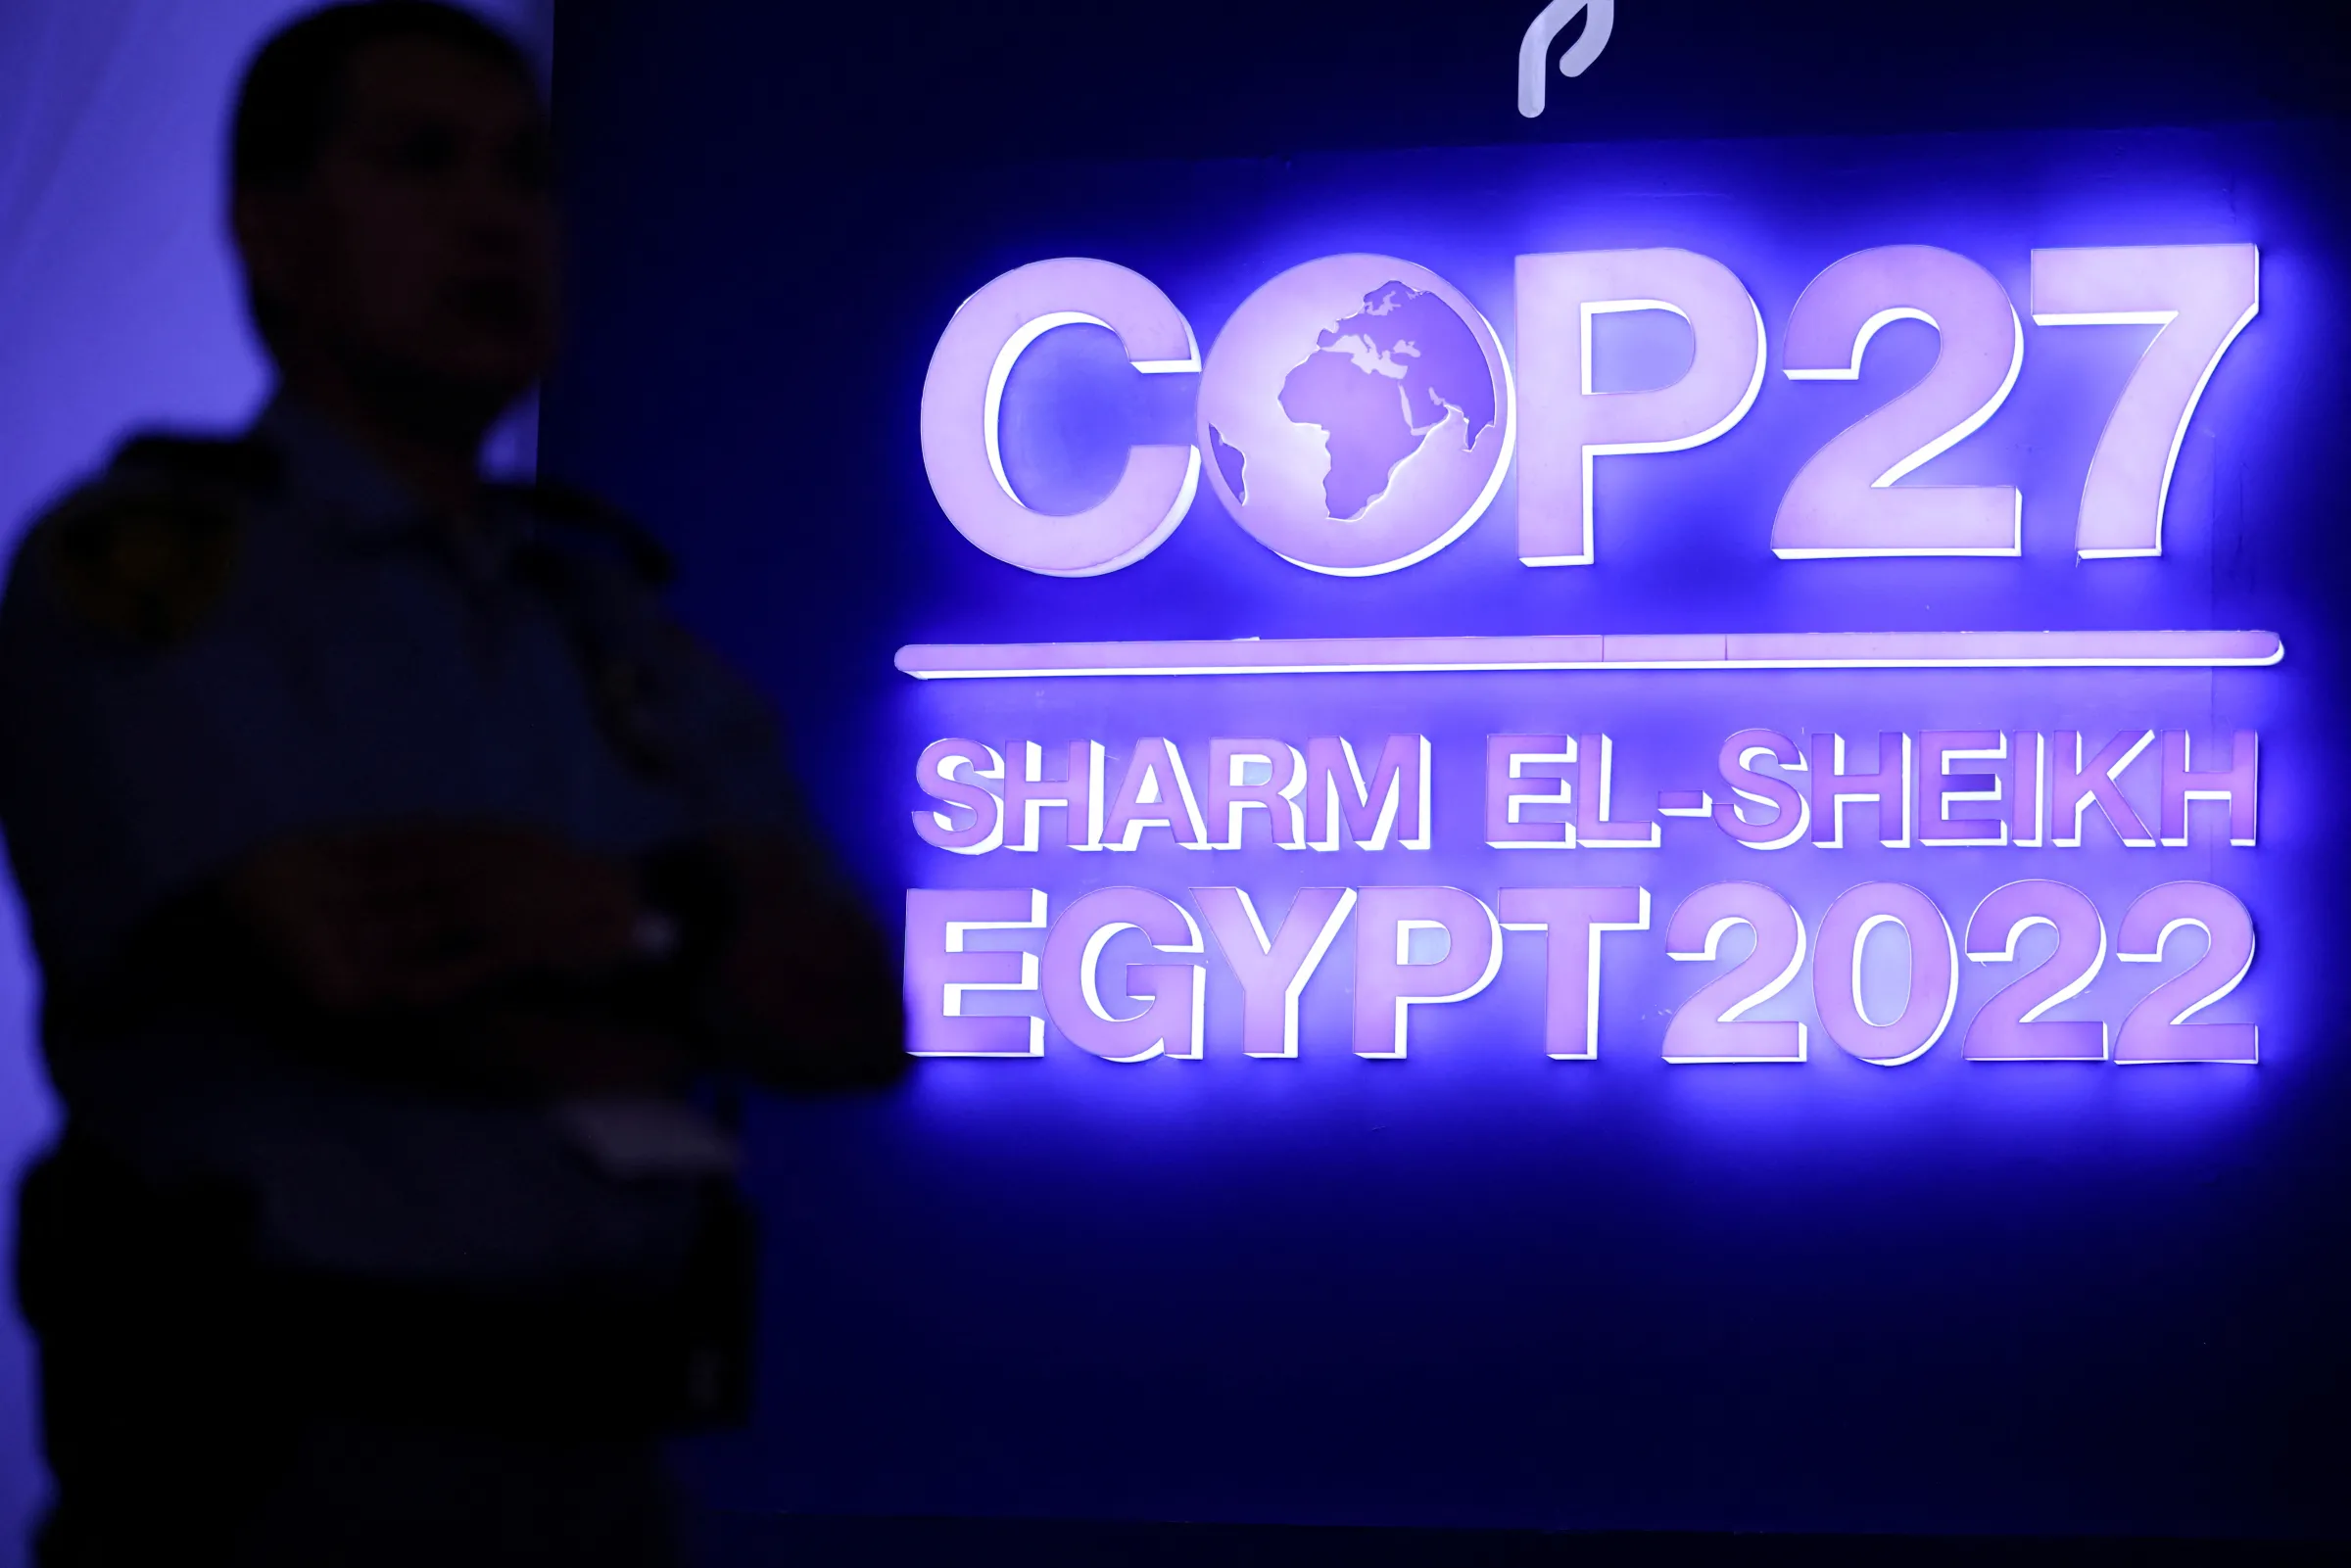 A security personnel stands guard next to the COP27 sign during the closing plenary at the COP27 climate summit in Red Sea resort of Sharm el-Sheikh, Egypt, November 20, 2022. REUTERS/Mohamed Abd El Ghany